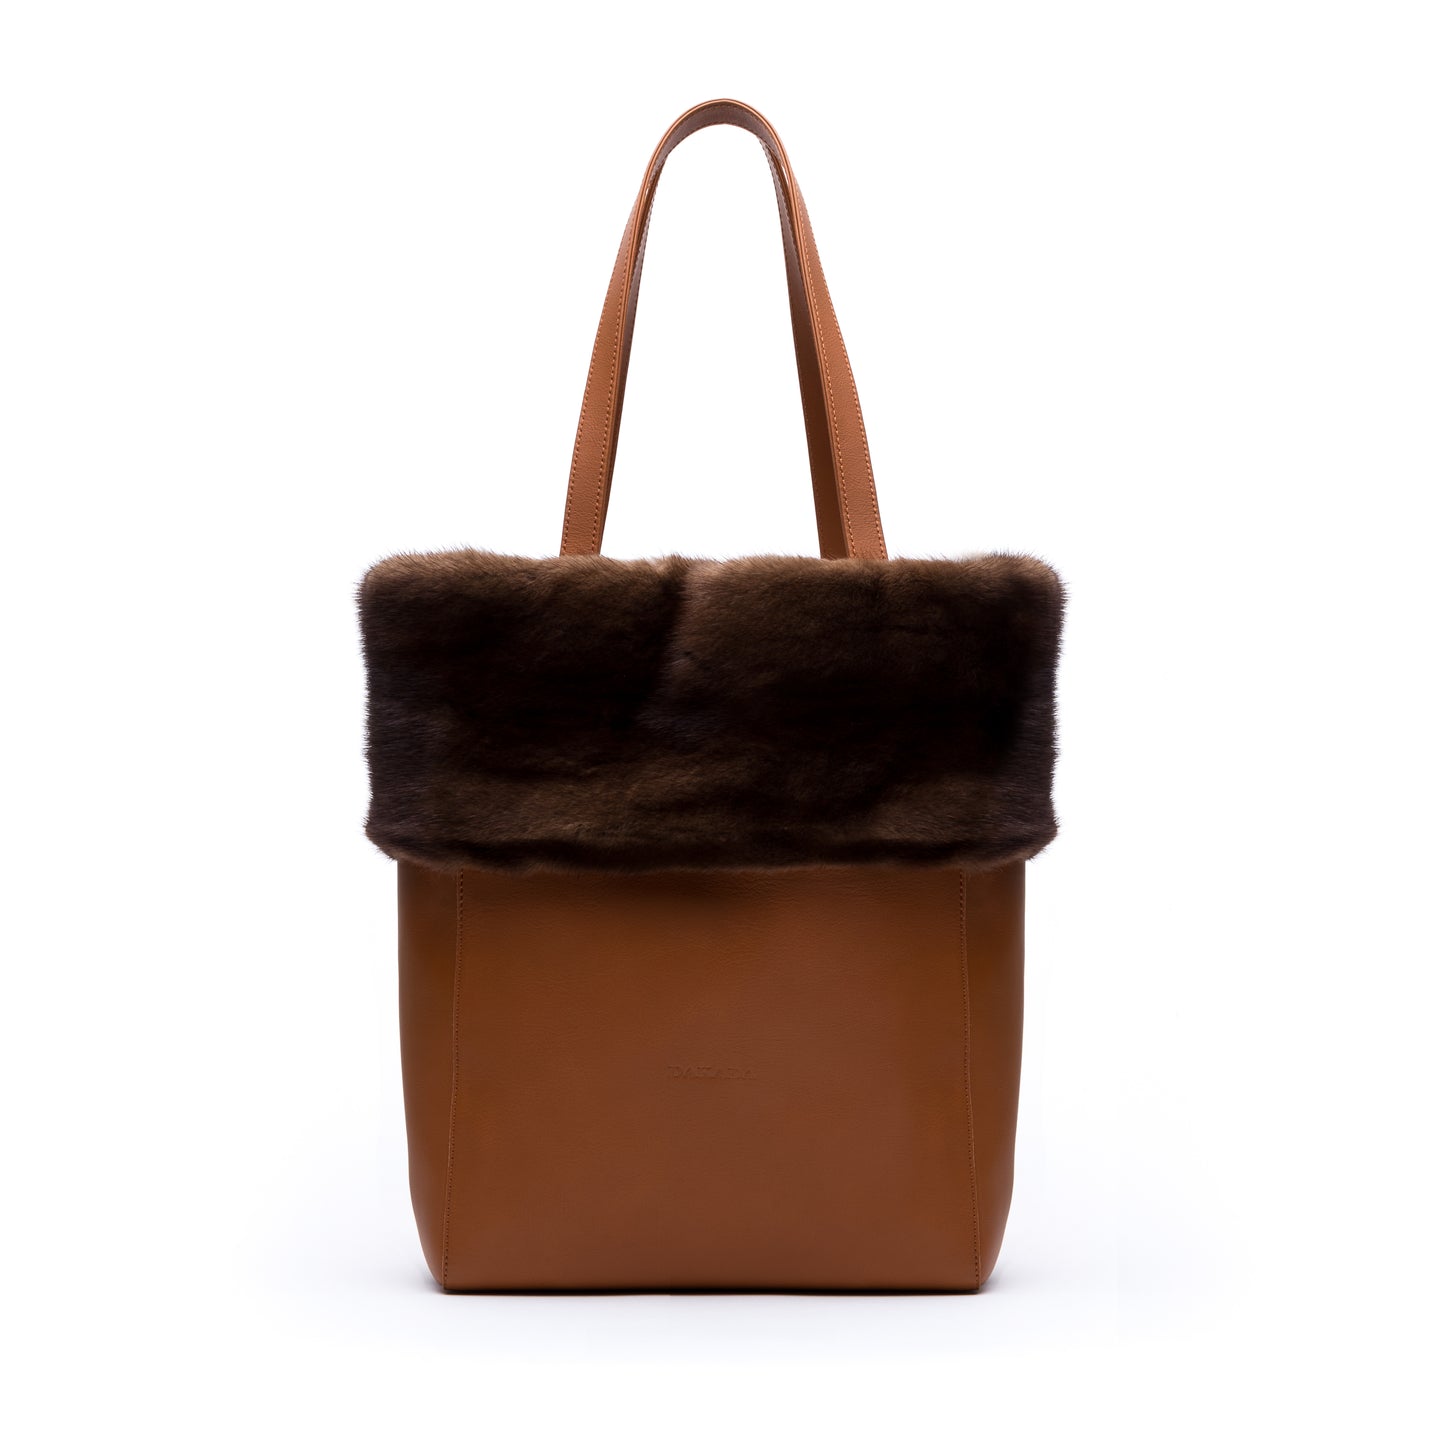 Kaley- Camel Leather Tote with Mahogany Mink